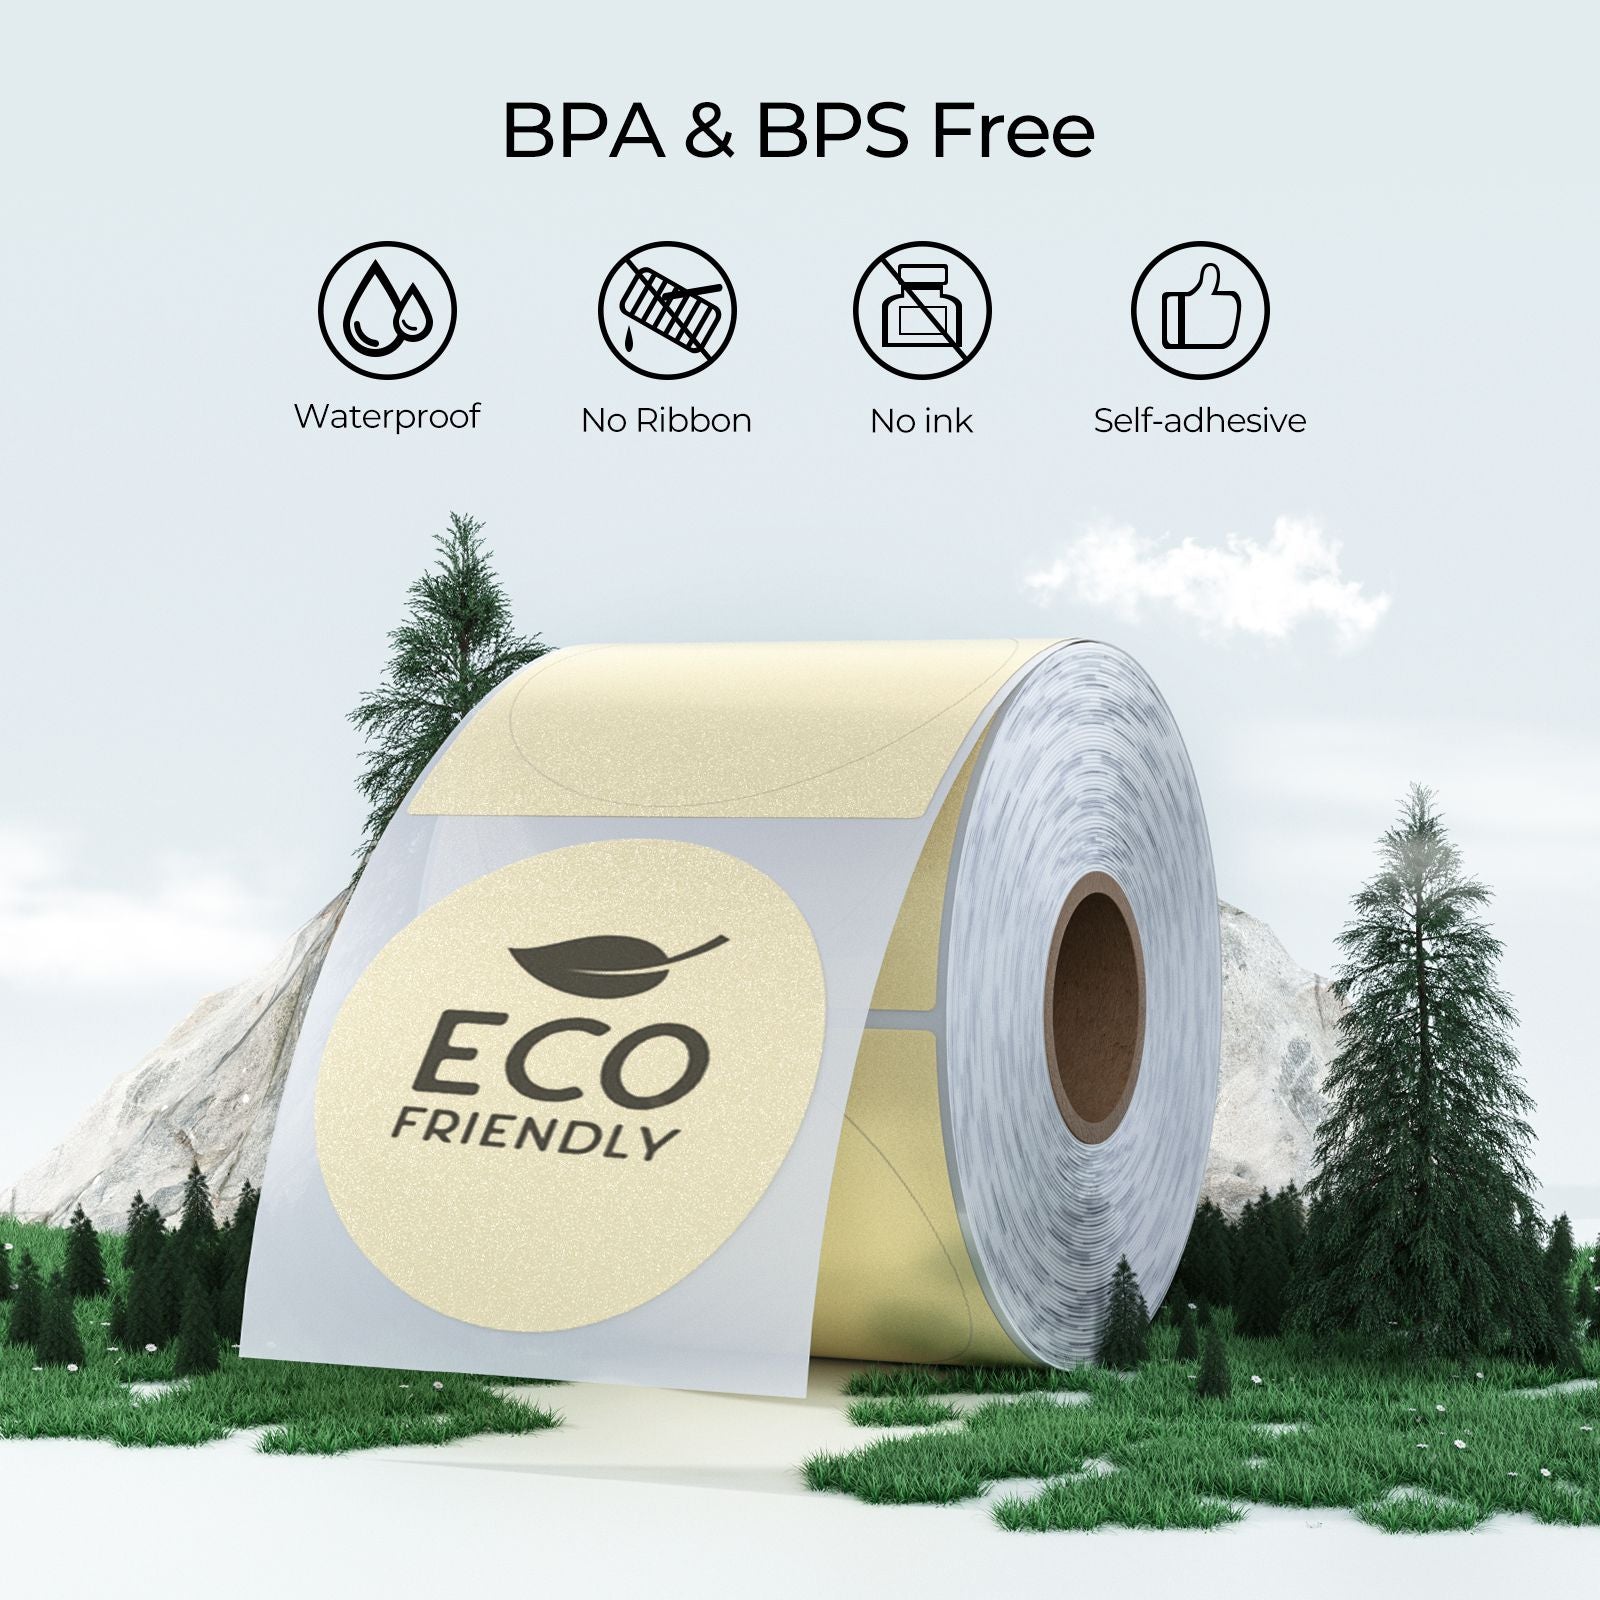 MUNBYN gold round thermal label stickers are BPA&BPS Free.